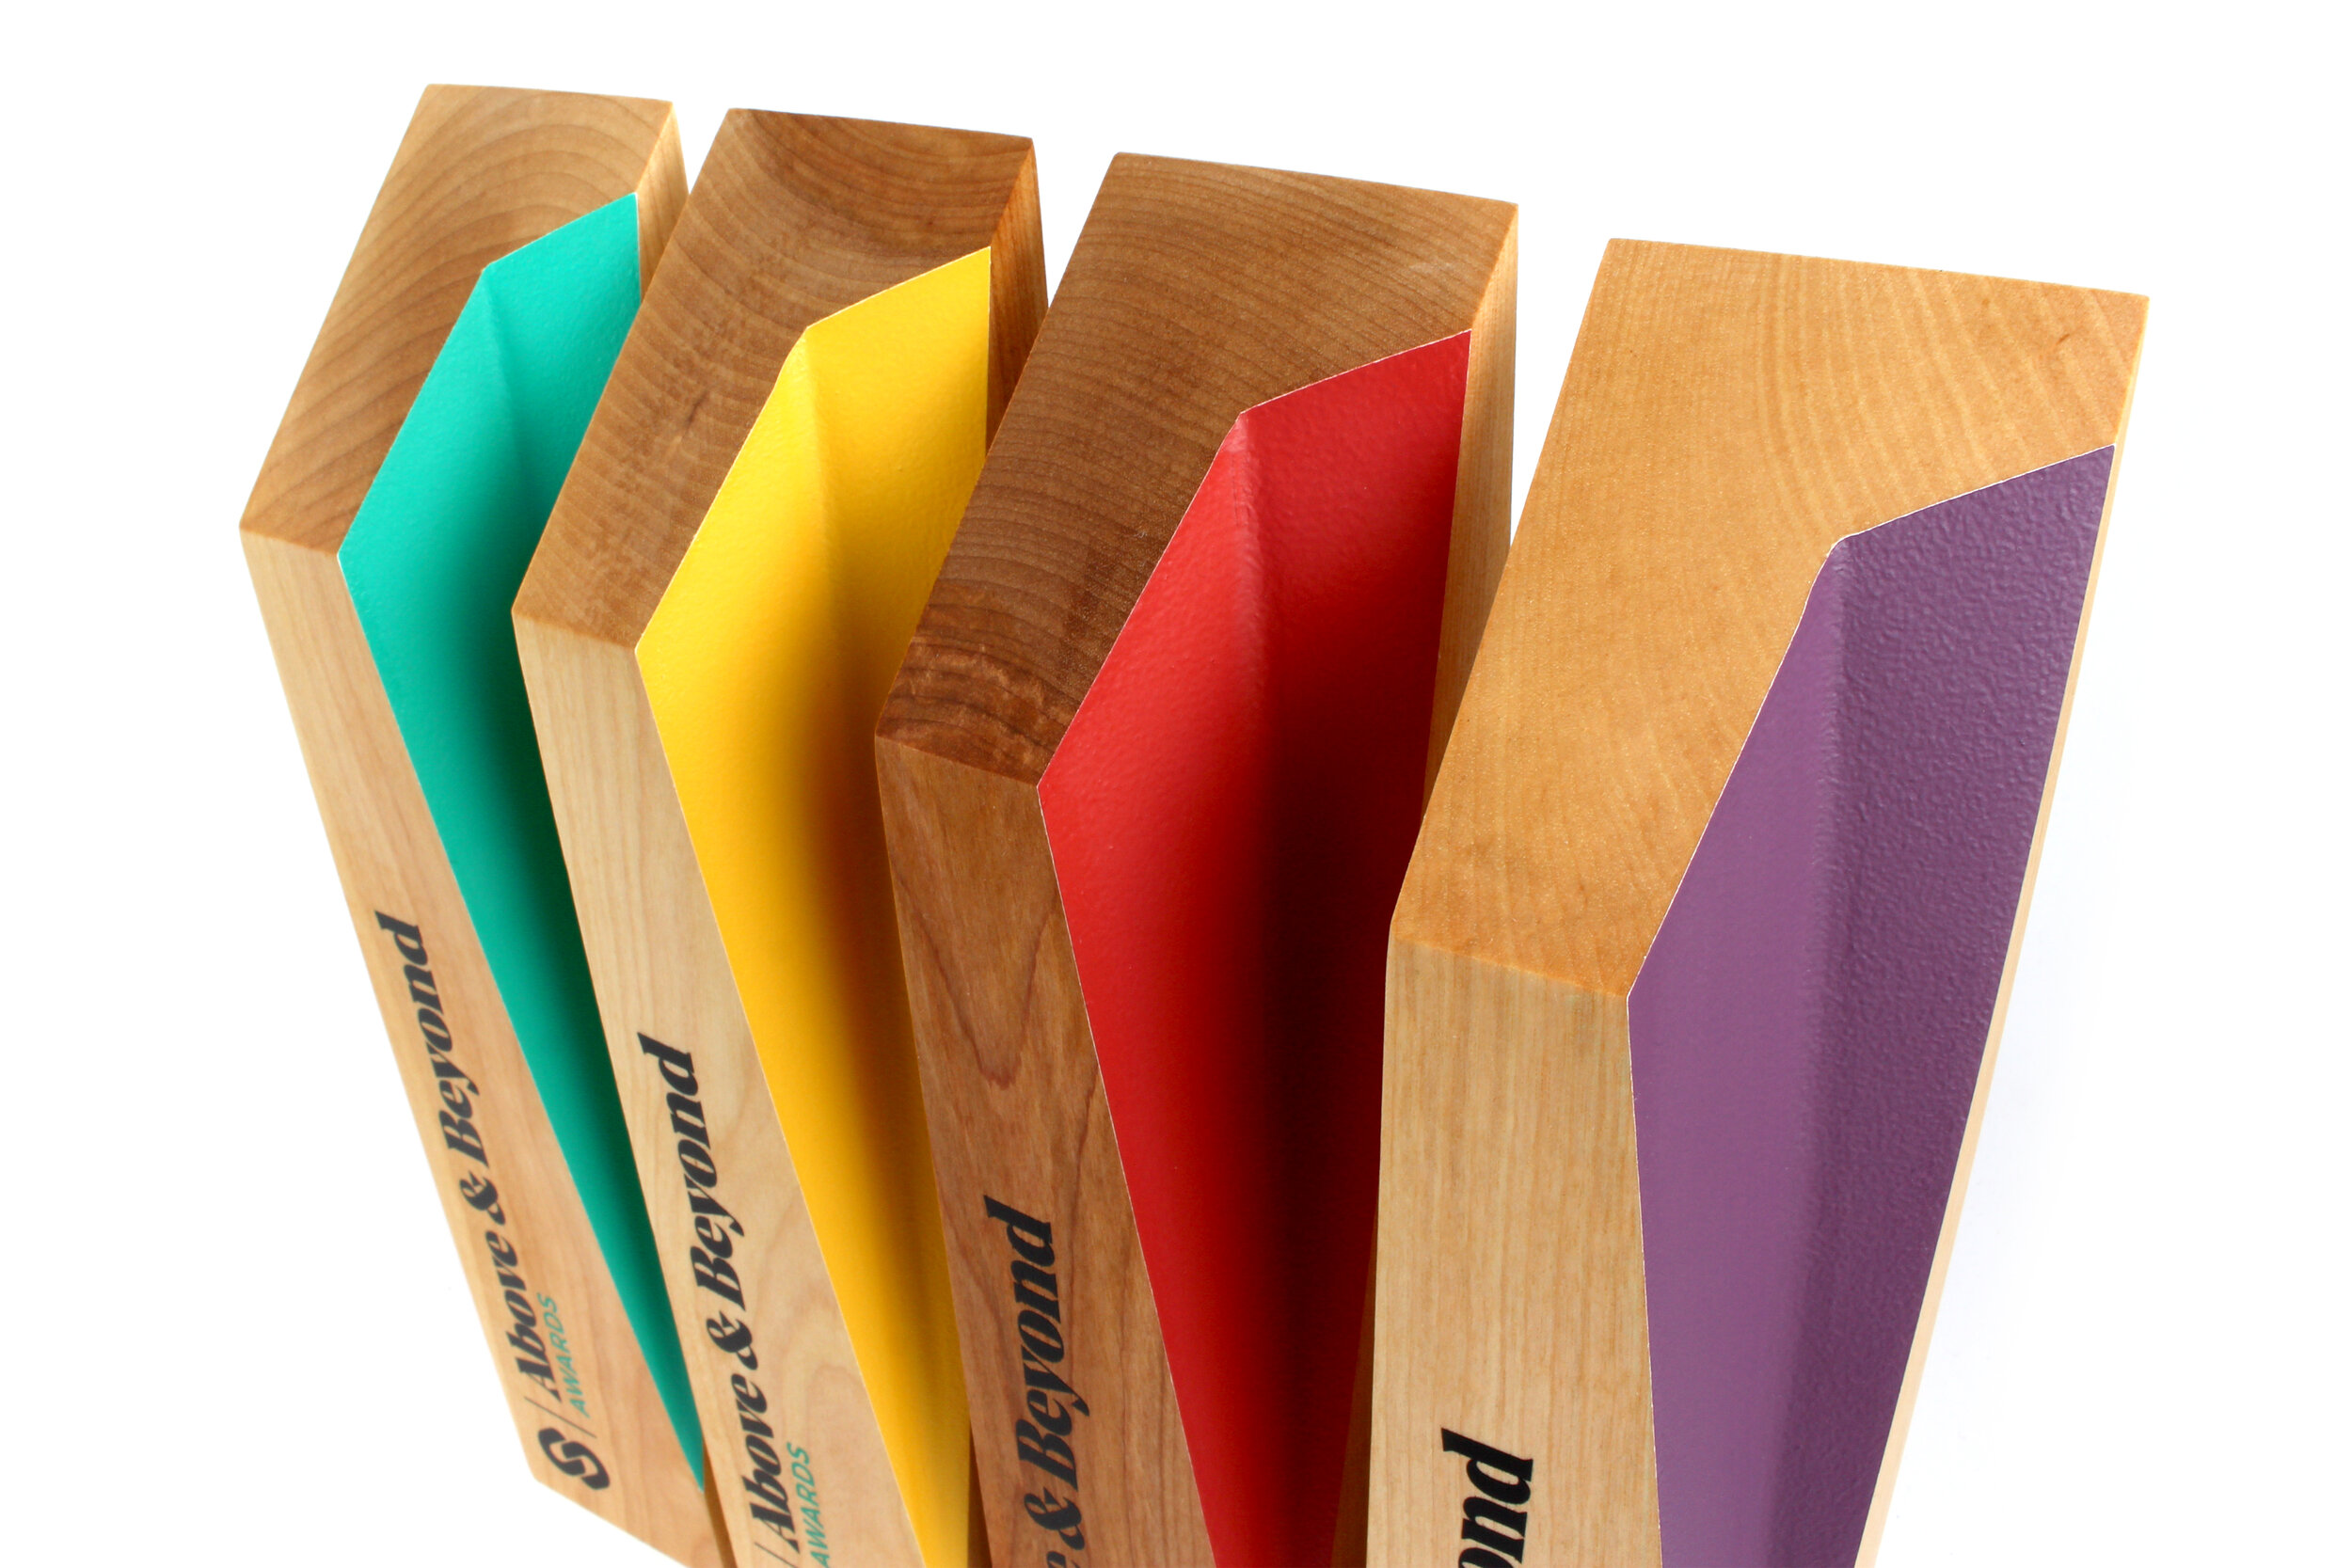 Modern and beautiful sustainable wooden awards. Great for corporate recognition or service awards and trophies. 